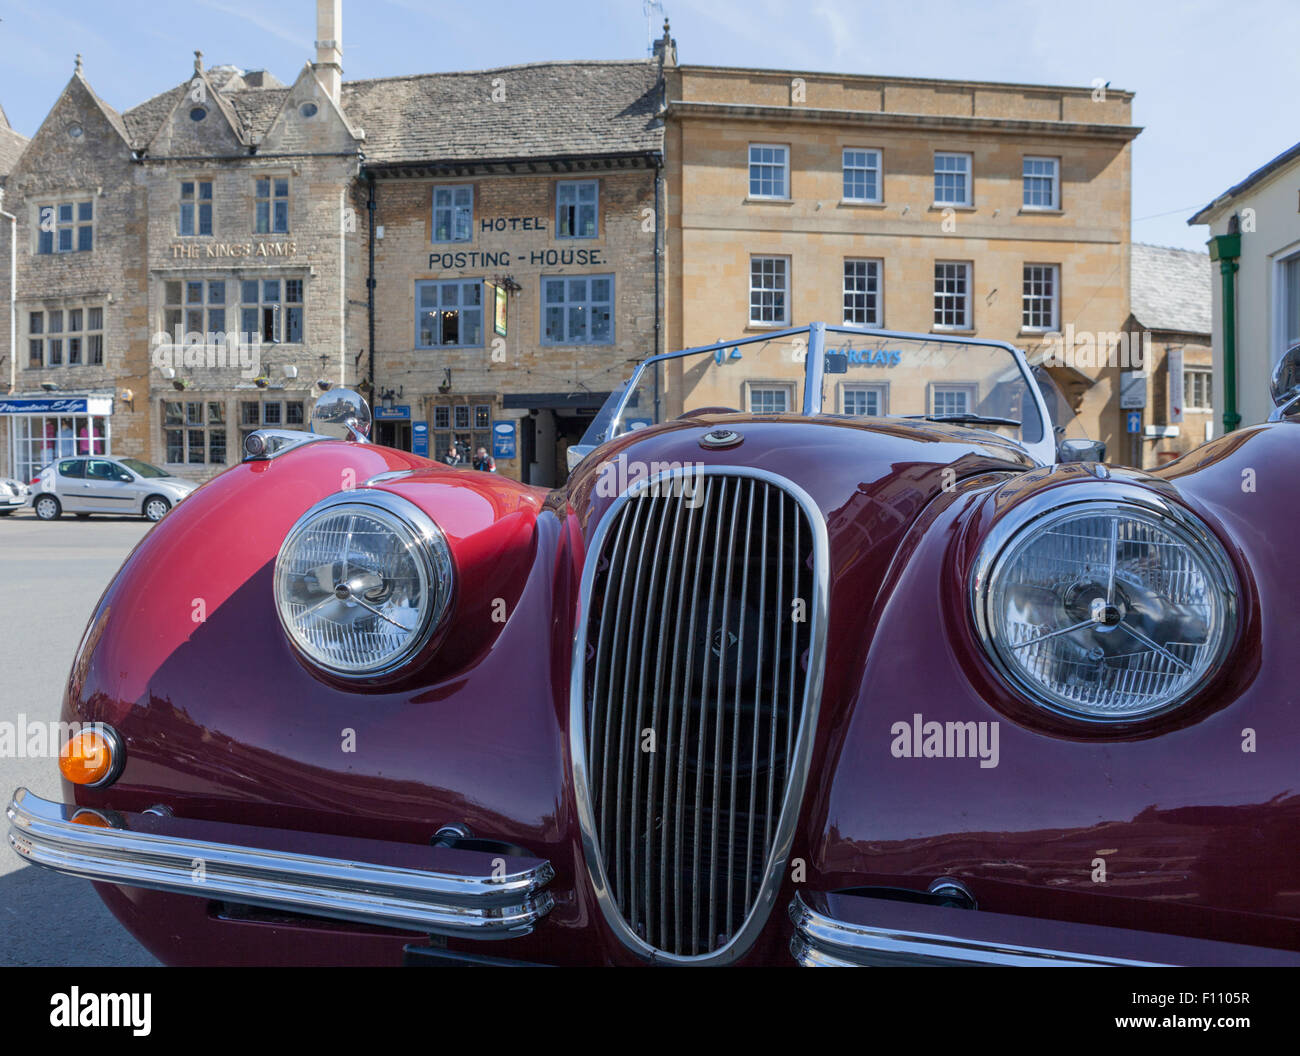 Rote Vintage Jaguar Cabrio geparkt in Main Square Stow-on-the-Wold in den Cotswolds in England Stockfoto